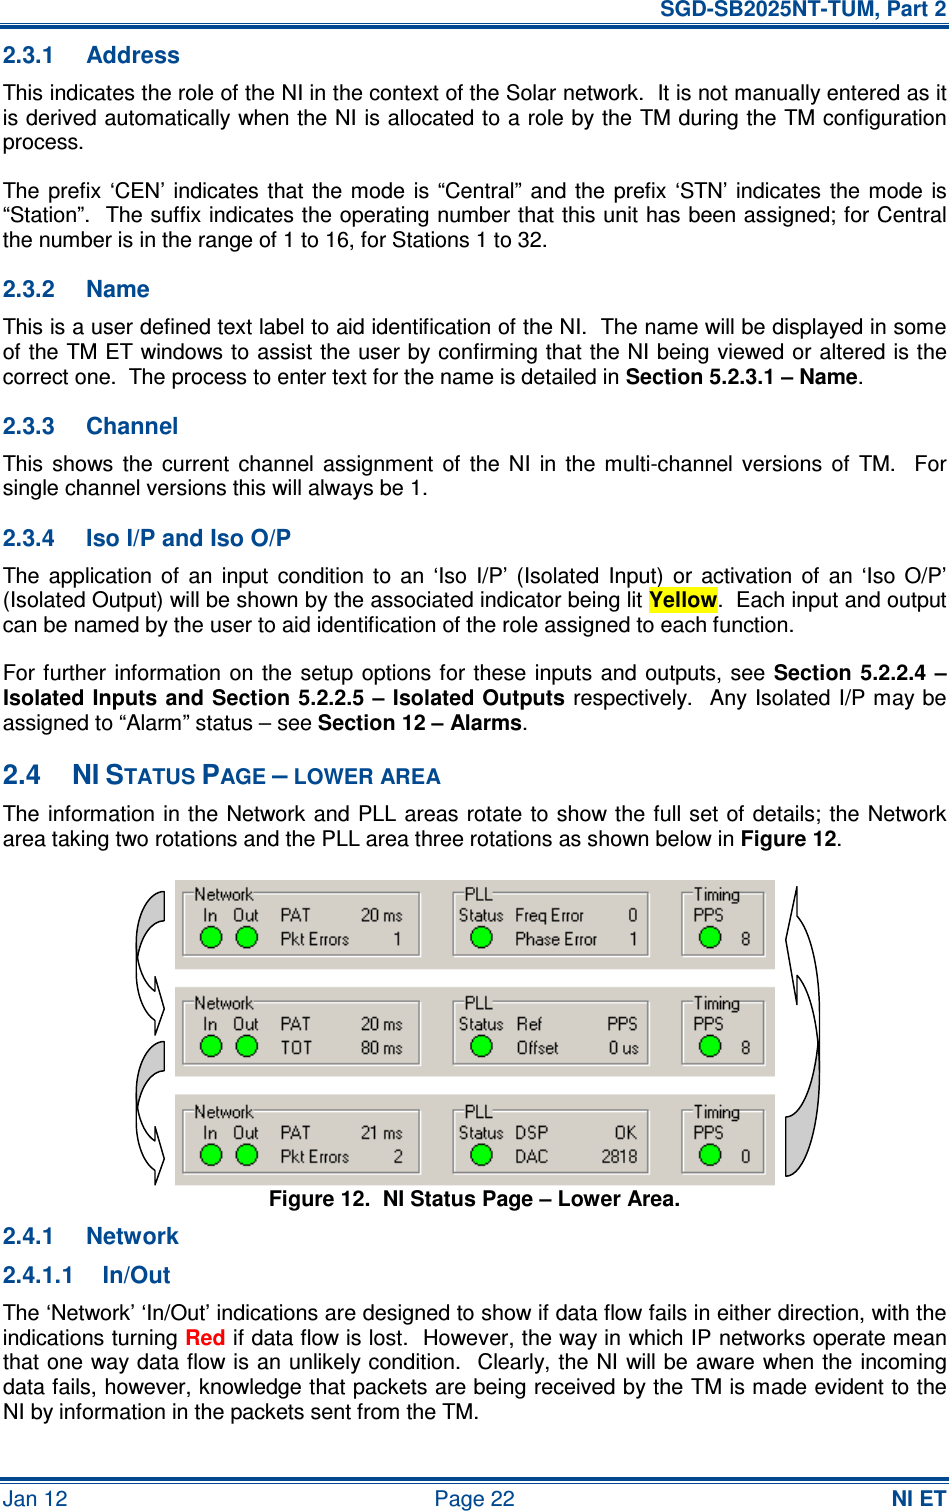   SGD-SB2025NT-TUM, Part 2 Jan 12  Page 22 NI ET 2.3.1  Address This indicates the role of the NI in the context of the Solar network.  It is not manually entered as it is derived automatically when the NI is allocated to a role by the TM during the TM configuration process. The prefix  ‘CEN’  indicates  that the  mode  is  “Central”  and  the  prefix  ‘STN’ indicates  the  mode  is “Station”.  The suffix indicates the operating number that this unit has been assigned; for Central the number is in the range of 1 to 16, for Stations 1 to 32. 2.3.2  Name This is a user defined text label to aid identification of the NI.  The name will be displayed in some of the TM ET windows to assist the user by confirming that the NI being viewed or altered is the correct one.  The process to enter text for the name is detailed in Section 5.2.3.1 – Name. 2.3.3  Channel This  shows  the  current  channel  assignment  of  the  NI  in  the  multi-channel  versions  of  TM.    For single channel versions this will always be 1. 2.3.4  Iso I/P and Iso O/P The  application  of  an  input  condition  to  an  ‘Iso  I/P’  (Isolated  Input)  or  activation  of  an  ‘Iso  O/P’ (Isolated Output) will be shown by the associated indicator being lit Yellow.  Each input and output can be named by the user to aid identification of the role assigned to each function. For further  information  on  the  setup options  for these  inputs  and  outputs,  see Section  5.2.2.4  – Isolated Inputs and Section 5.2.2.5 – Isolated Outputs respectively.   Any Isolated I/P may be assigned to “Alarm” status – see Section 12 – Alarms. 2.4  NI STATUS PAGE – LOWER AREA The information in the  Network and PLL areas rotate to  show the full set of details; the Network area taking two rotations and the PLL area three rotations as shown below in Figure 12. Figure 12.  NI Status Page – Lower Area. 2.4.1  Network 2.4.1.1  In/Out The ‘Network’ ‘In/Out’ indications are designed to show if data flow fails in either direction, with the indications turning Red if data flow is lost.  However, the way in which IP networks operate mean that one way data flow is an unlikely condition.   Clearly, the NI will be aware when the incoming data fails, however, knowledge that packets are being received by the TM is made evident to the NI by information in the packets sent from the TM. 